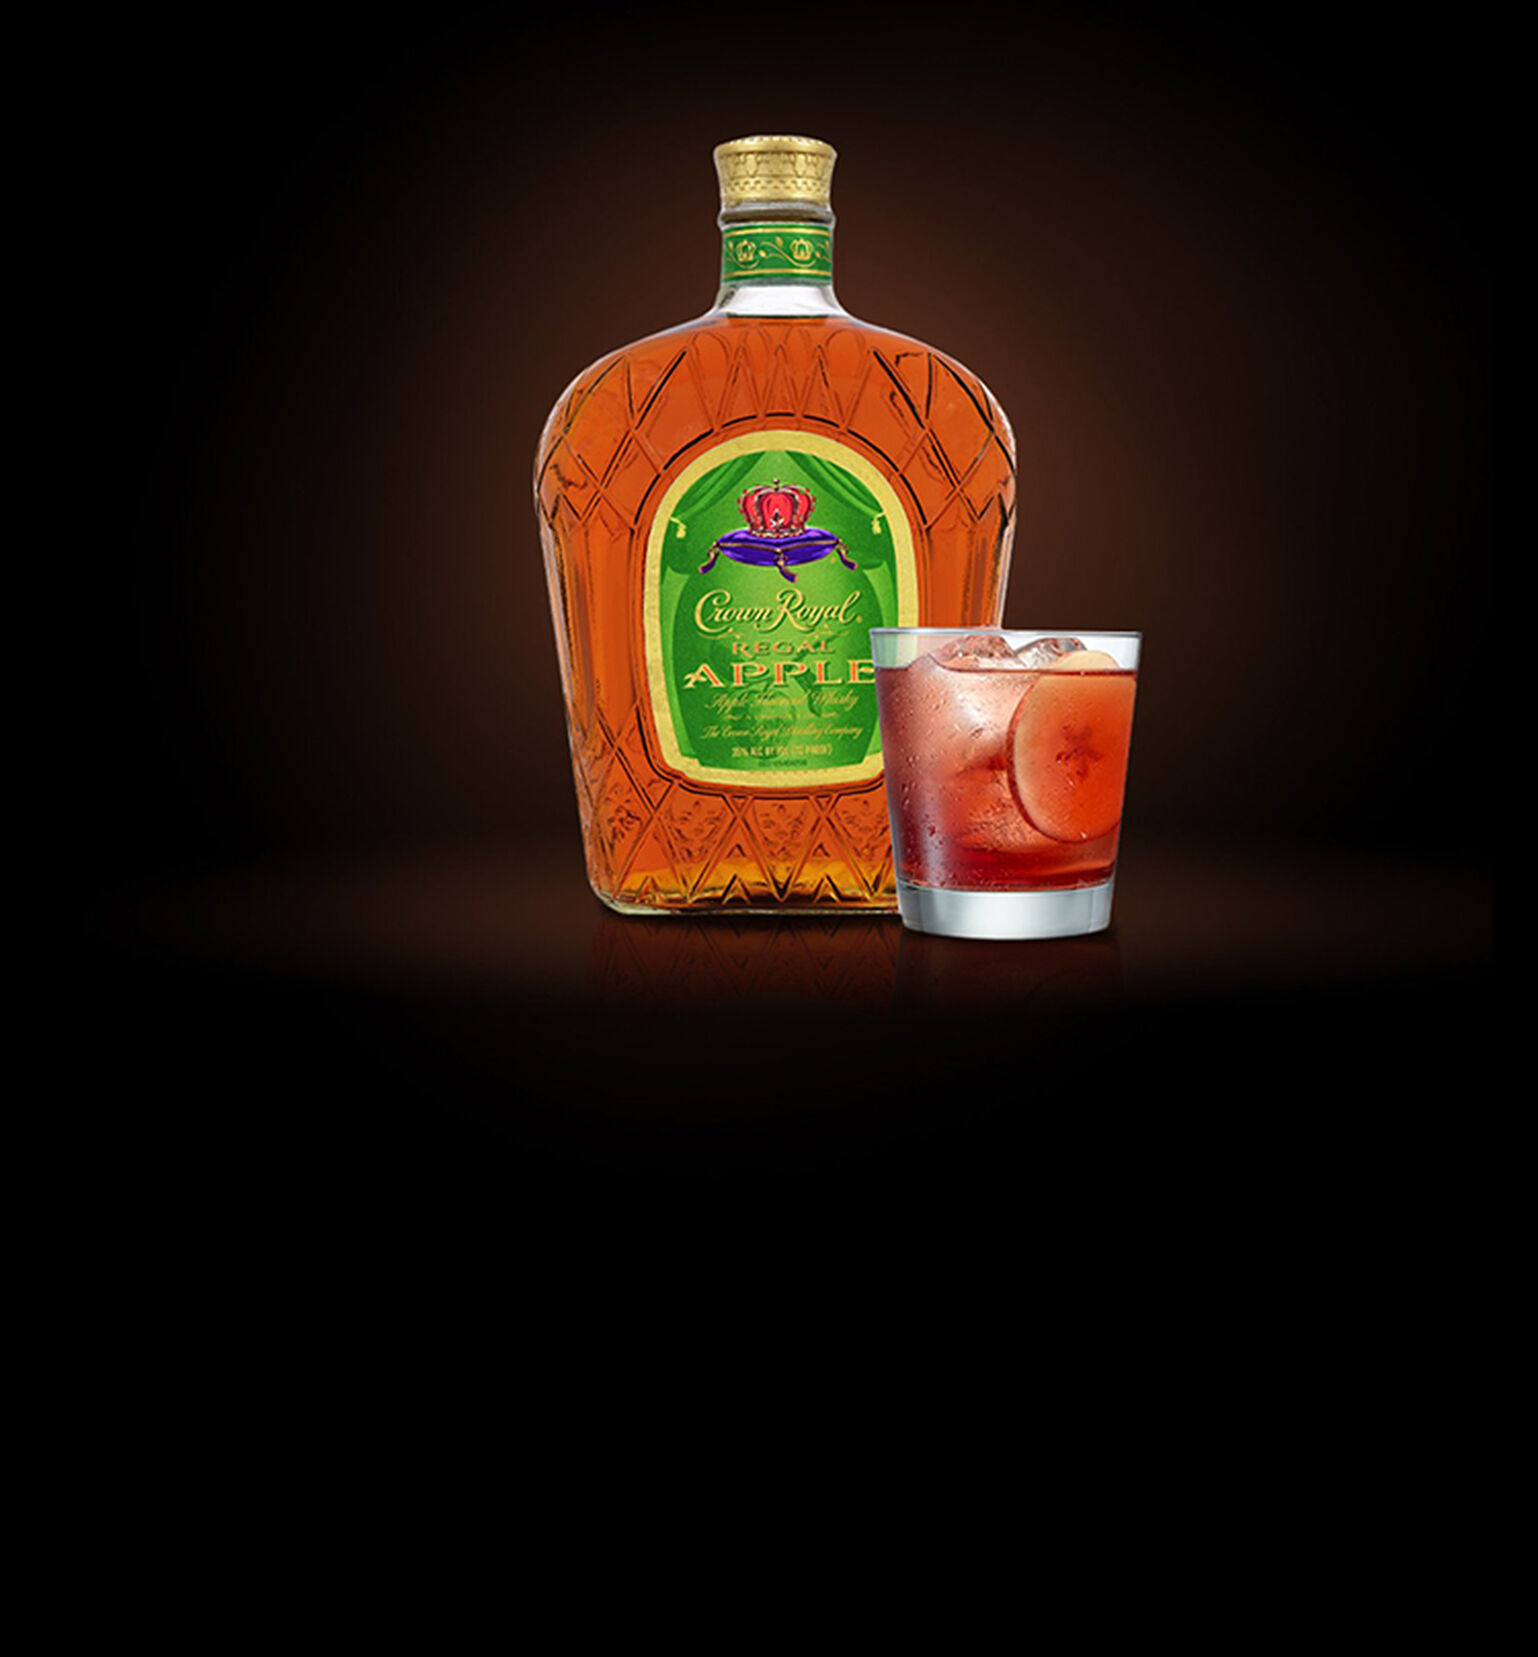 The Crown Royal Apple Crownberry Apple Cocktail